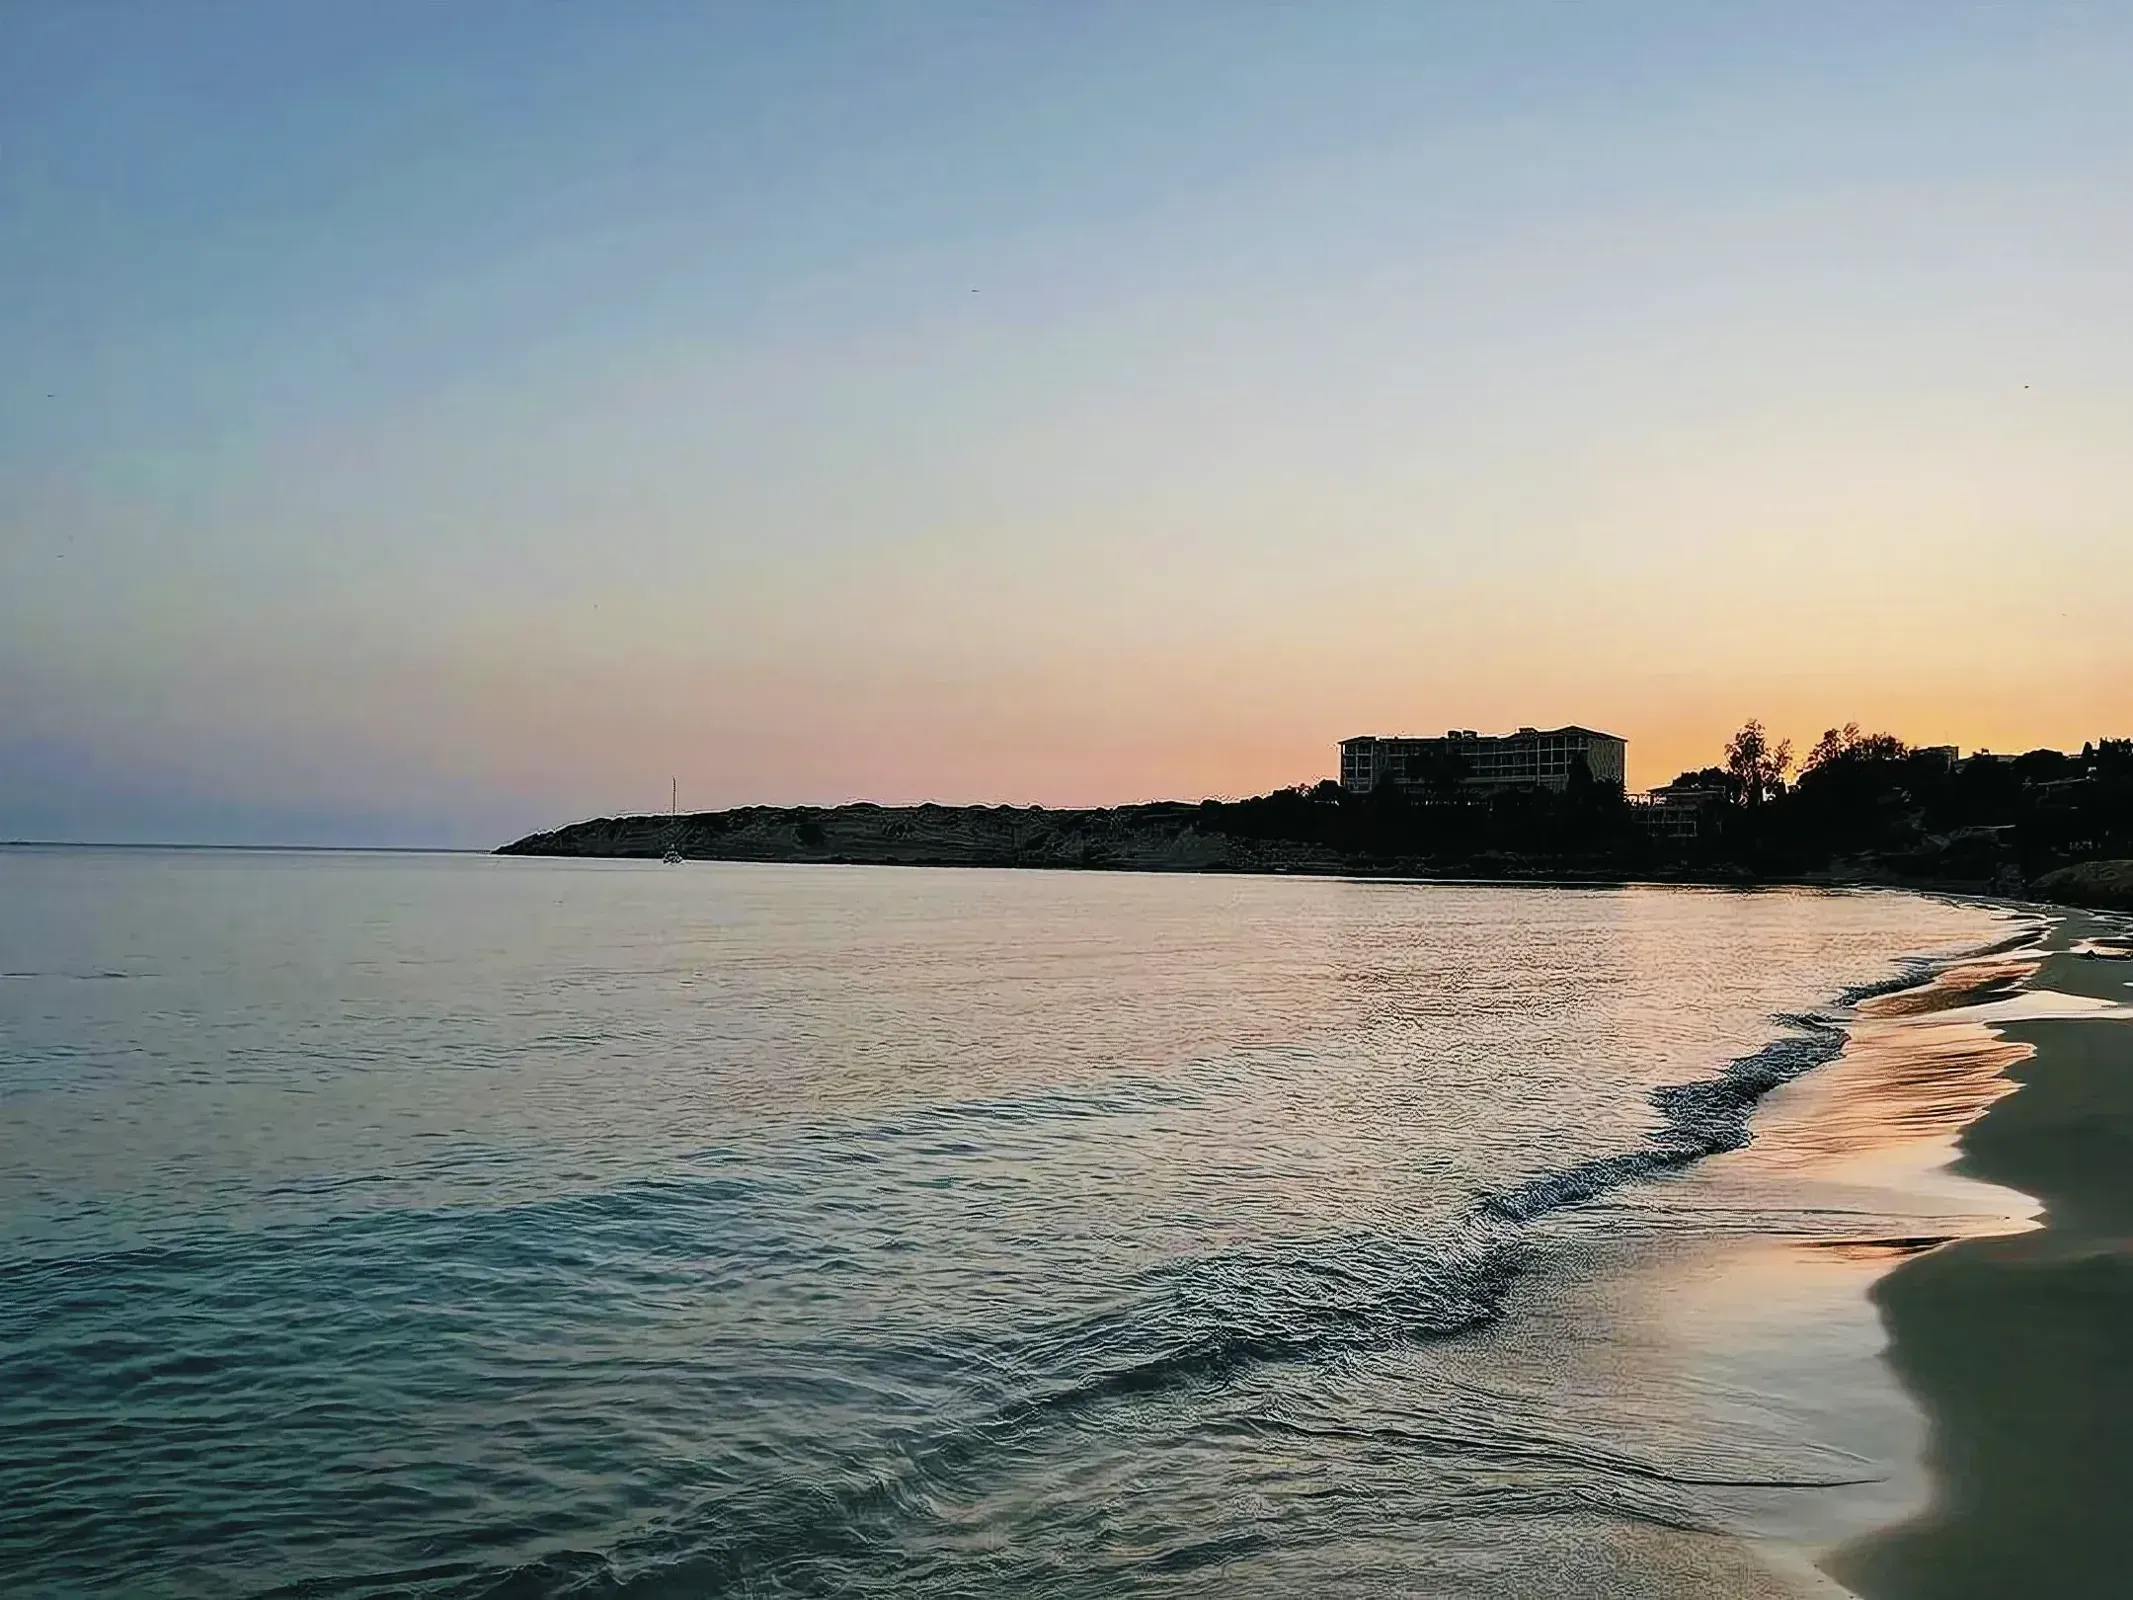 Serene sunset at Coral Bay beach in Cyprus